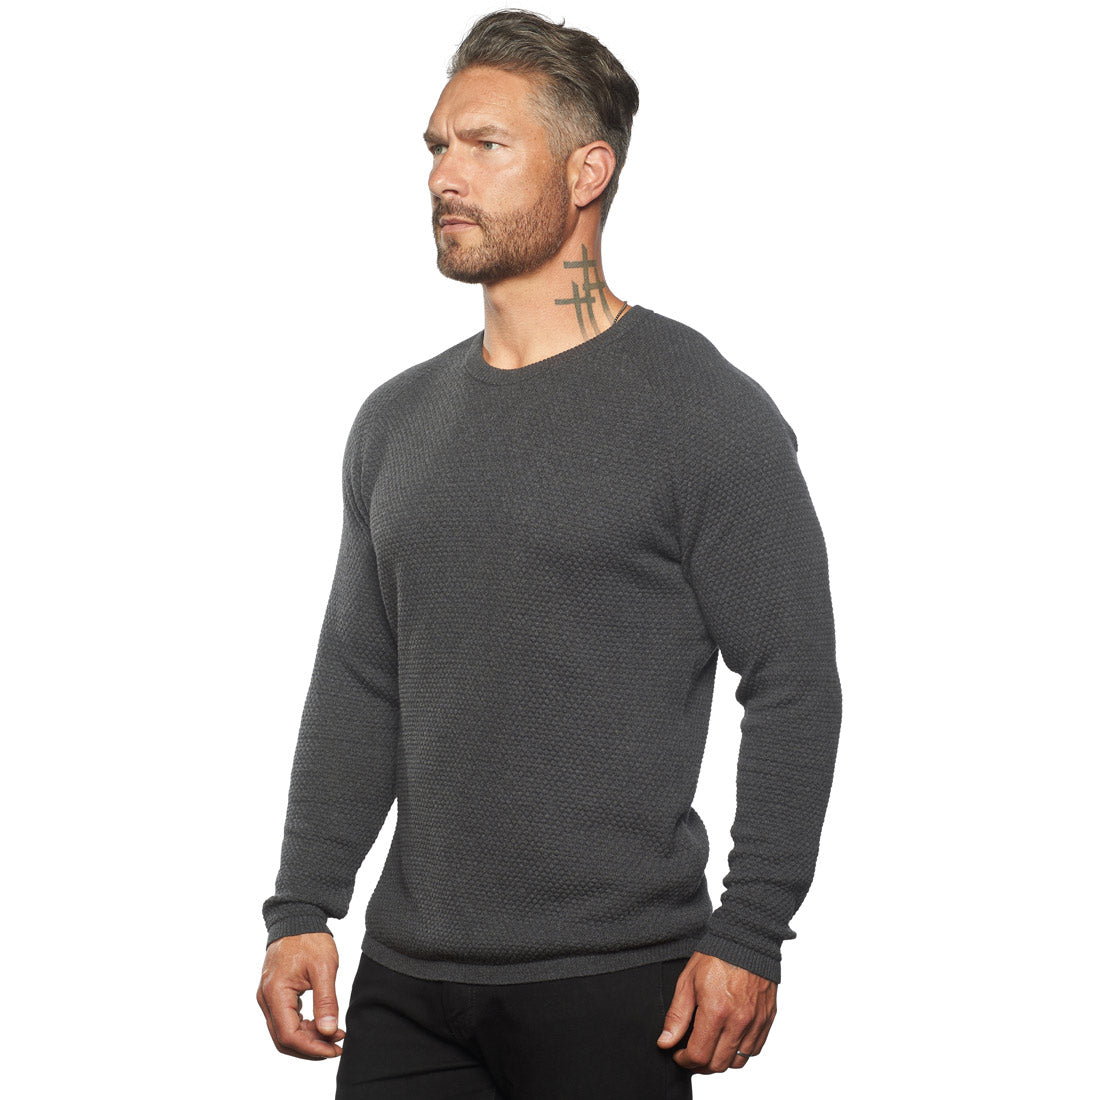 The Ripley Crew Neck Cotton & Cashmere FITTED Sweater by WESTON JON BOUCHÉR